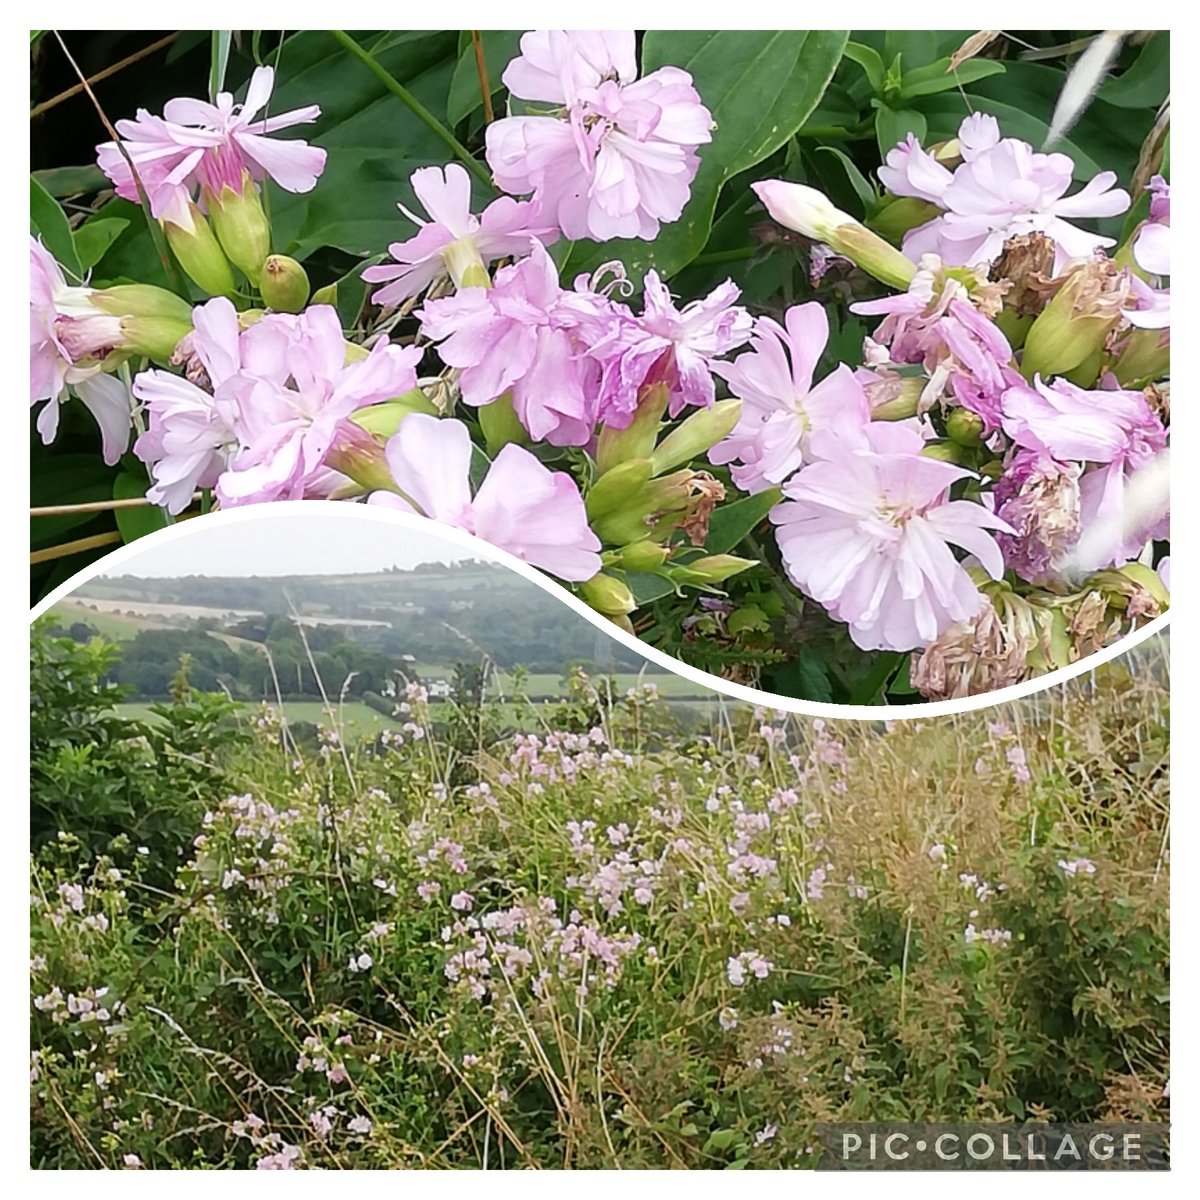 No pavements round our way but this pearly-pink, double Soapwort, Saponaria officinalis, catches the eye on the side of the road between Upper Aghada & Rostellan. It has escaped the hedge-cutter once again! This is the only patch I know of round here. #WildflowerHour